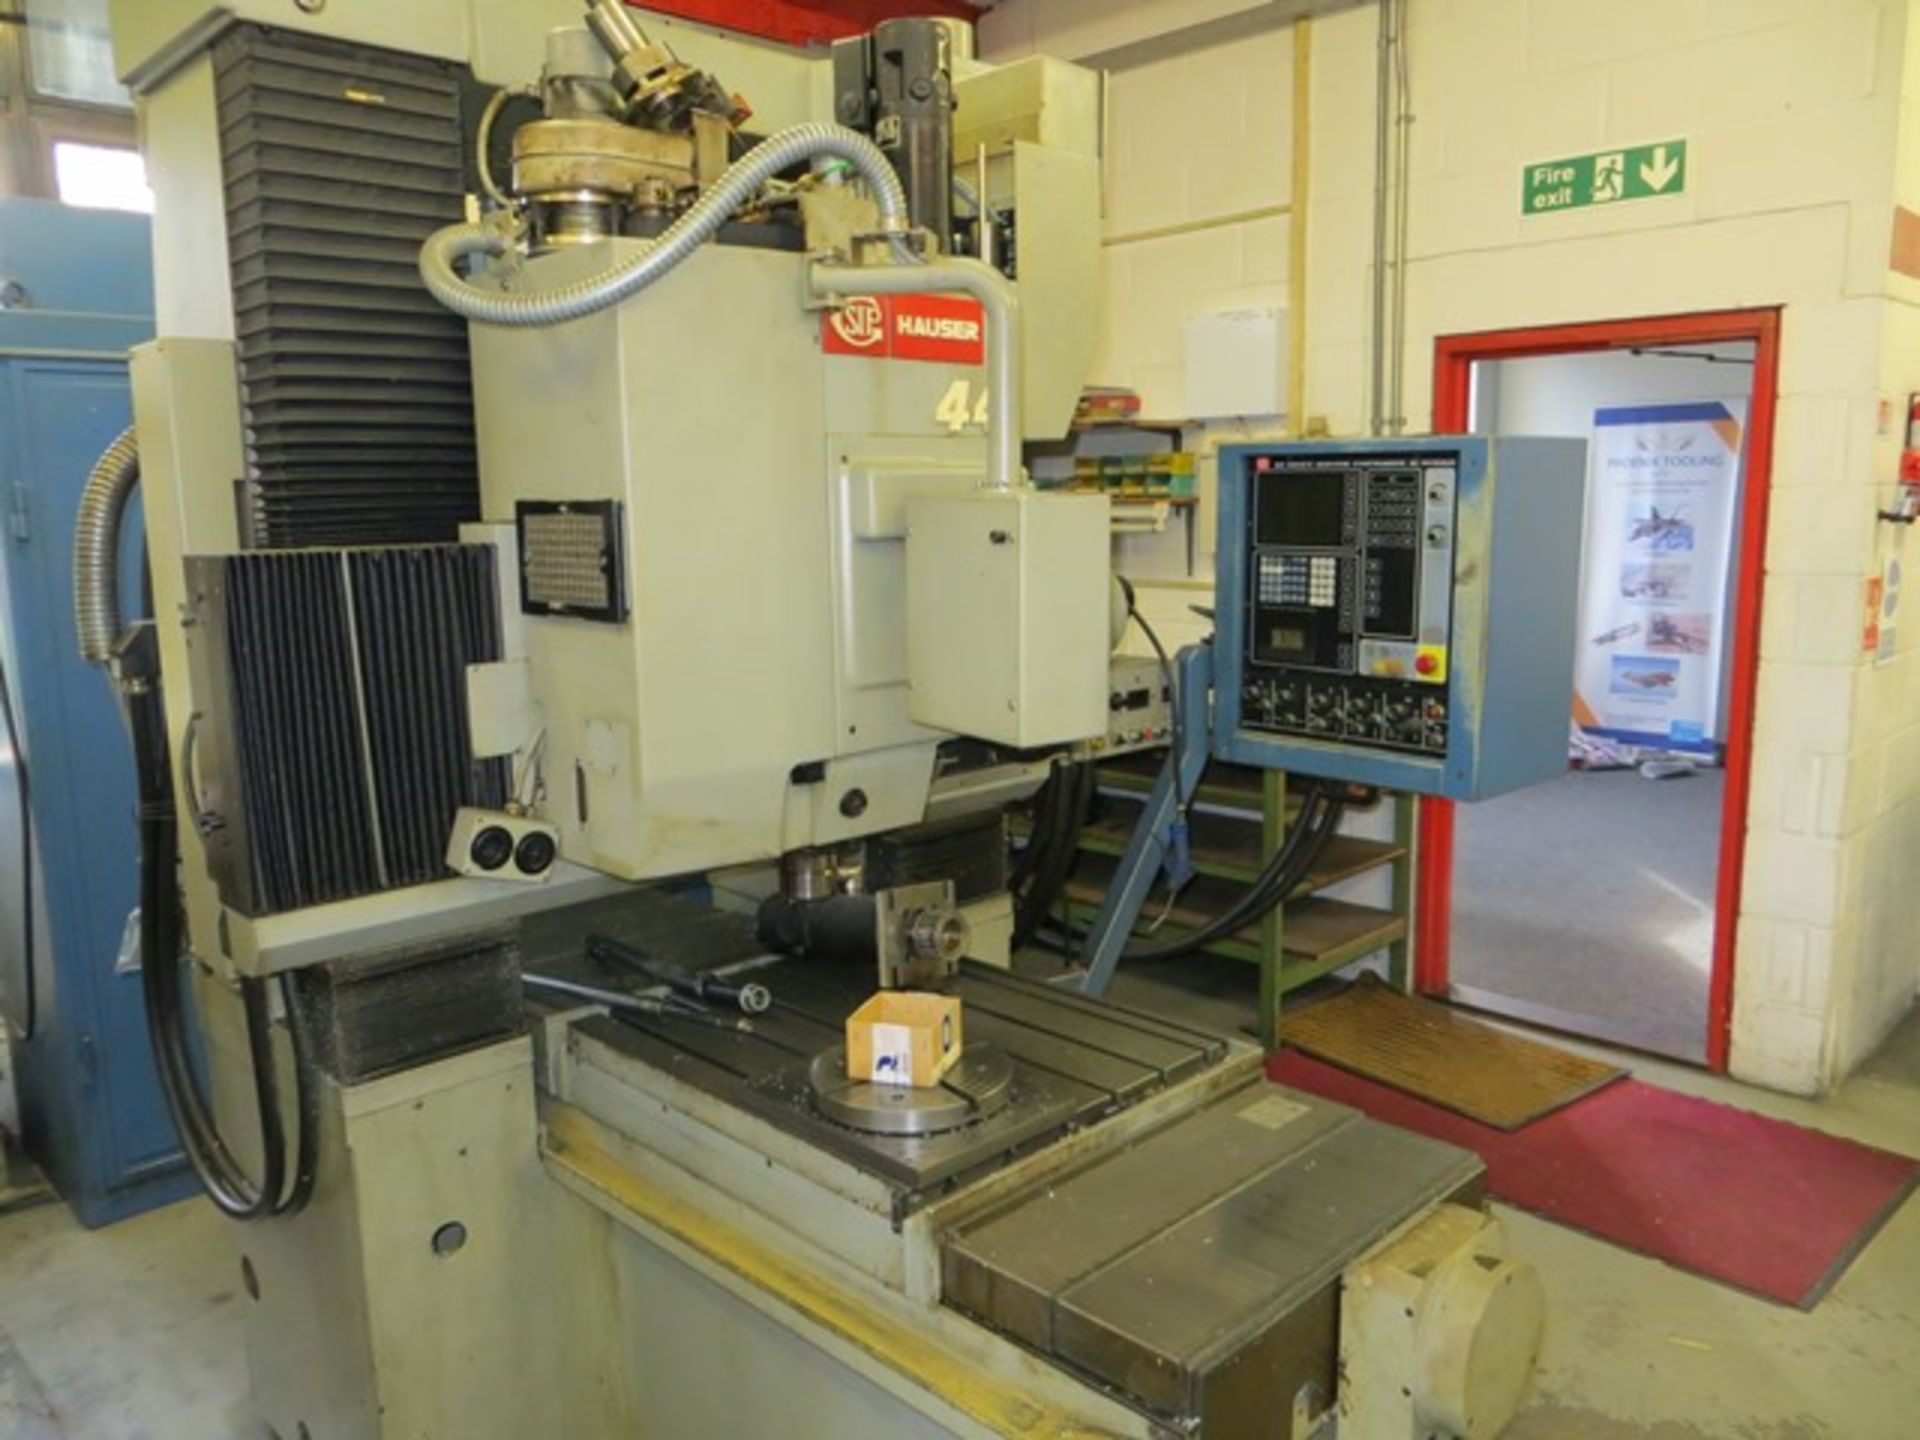 SIP Hauser MP-44 jig borer with CNC controller suitable for spares or repair Serial no. 0401. *A